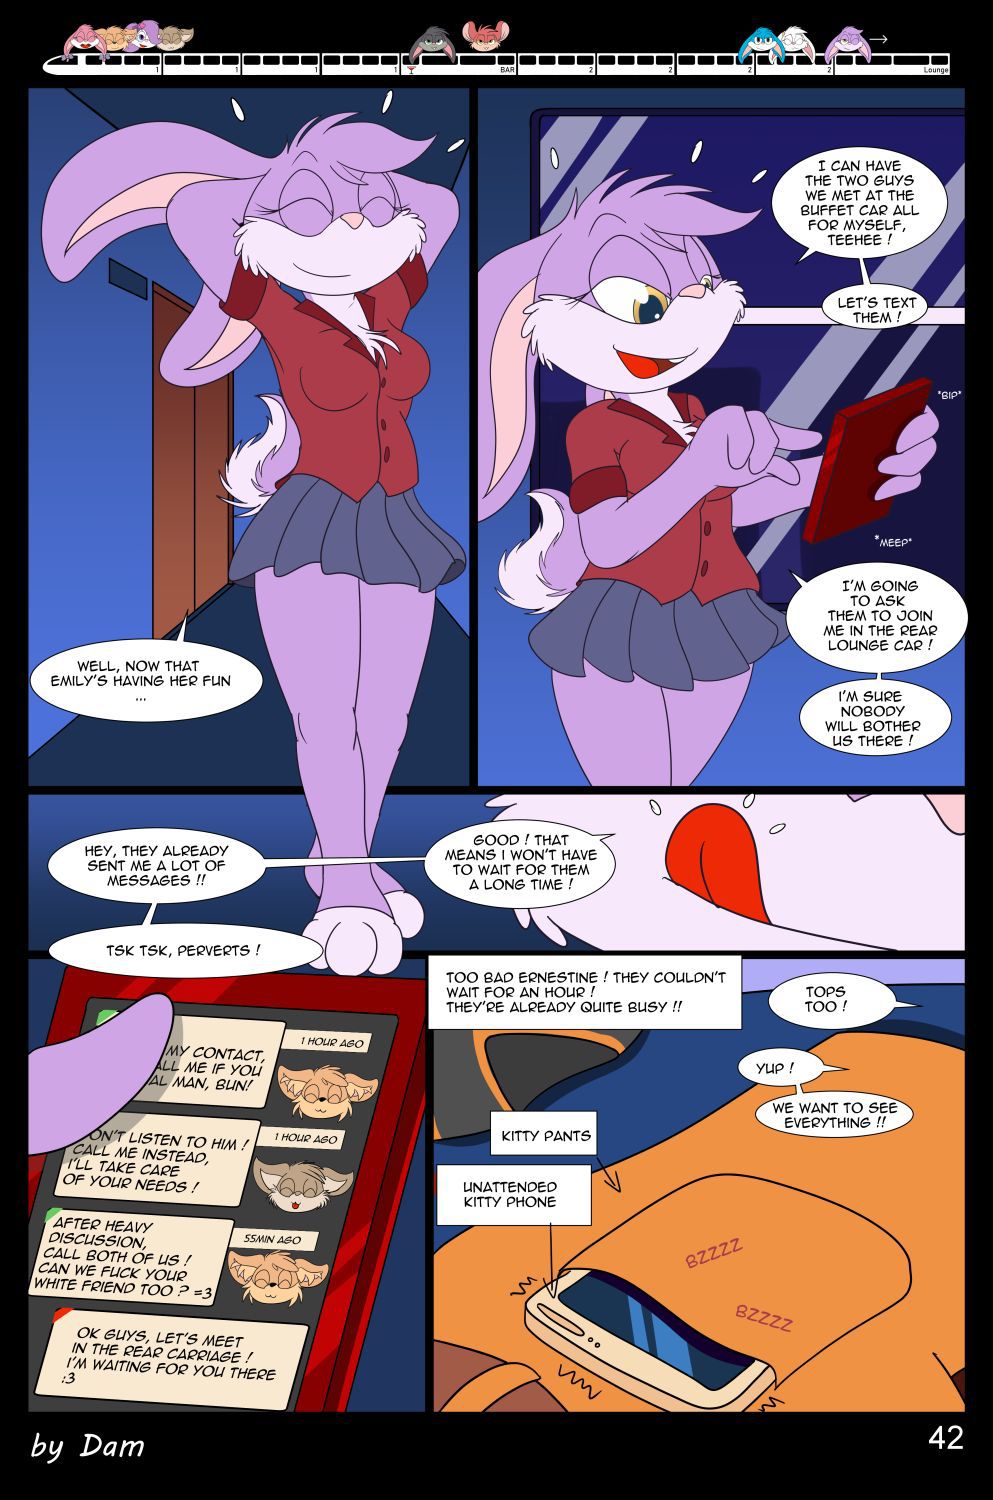 [Dam] Toons on a train [Ongoing] 42